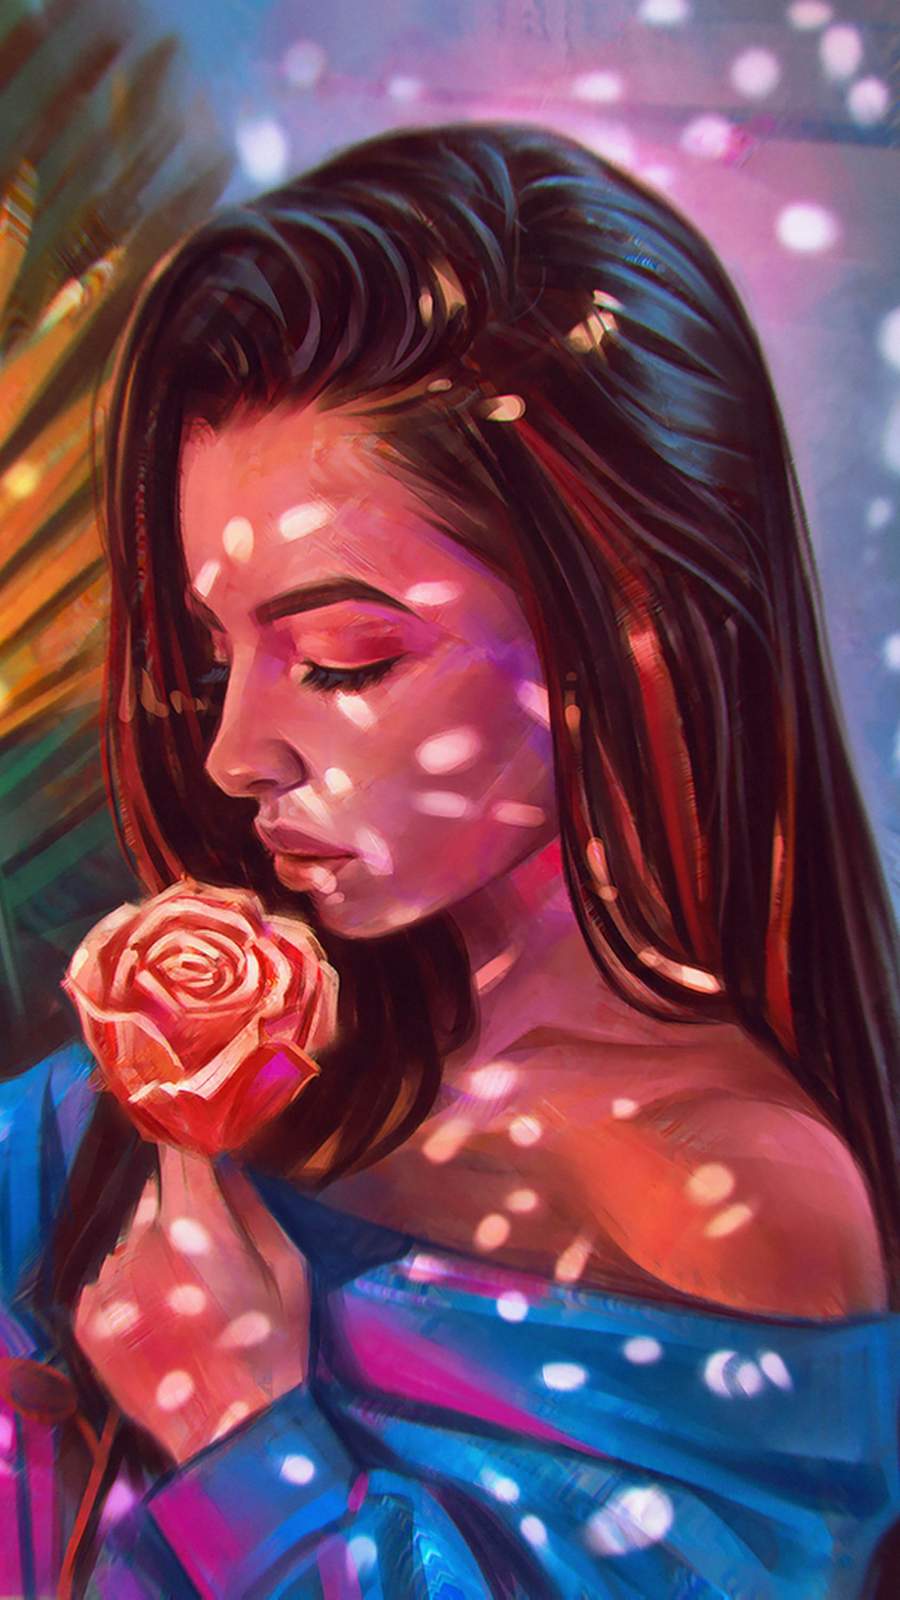 Girl with Rose Art